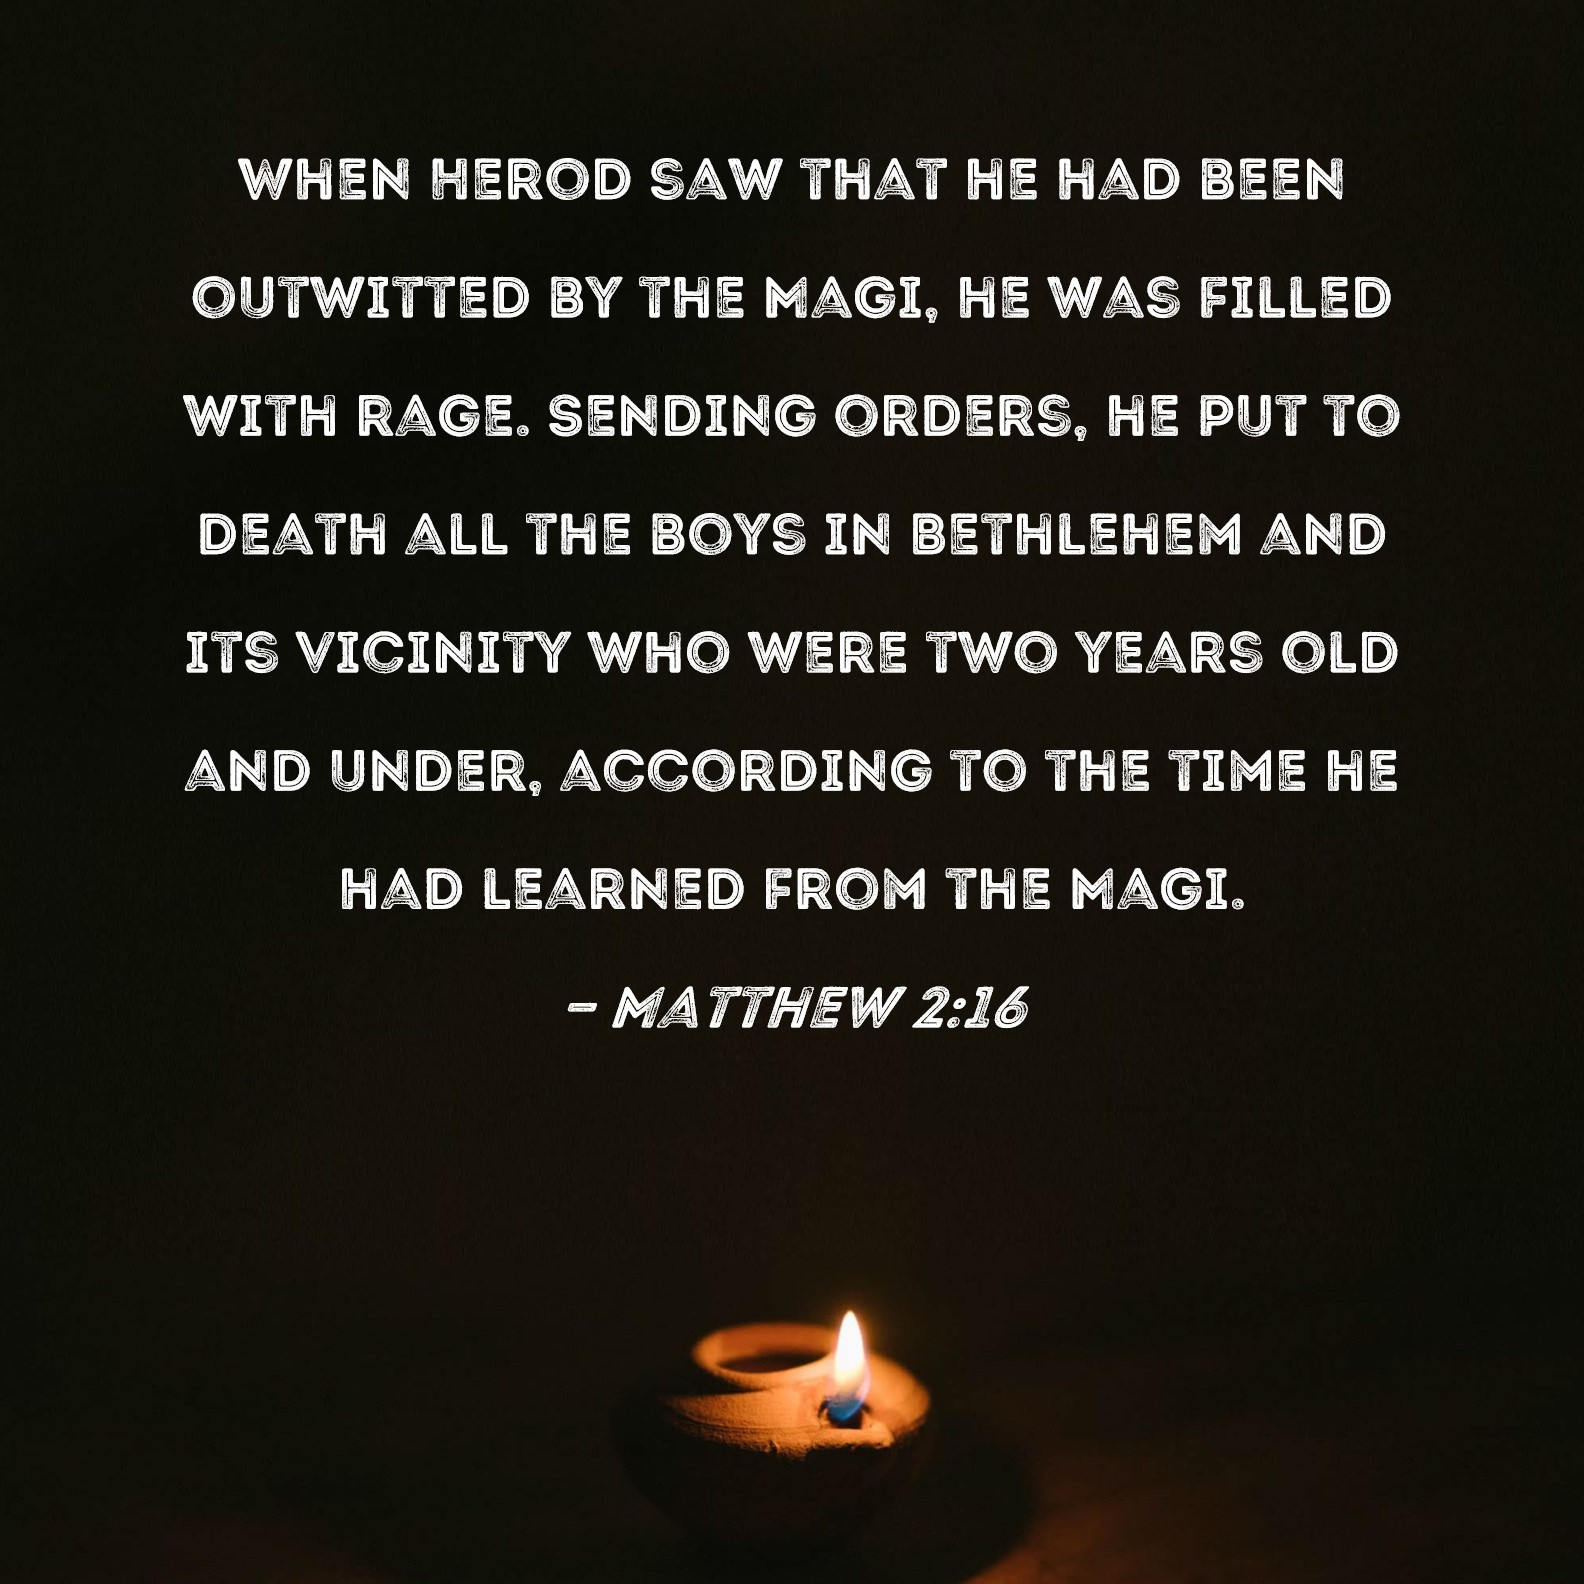 Matthew 2:16 When Herod saw that he had been outwitted by the Magi